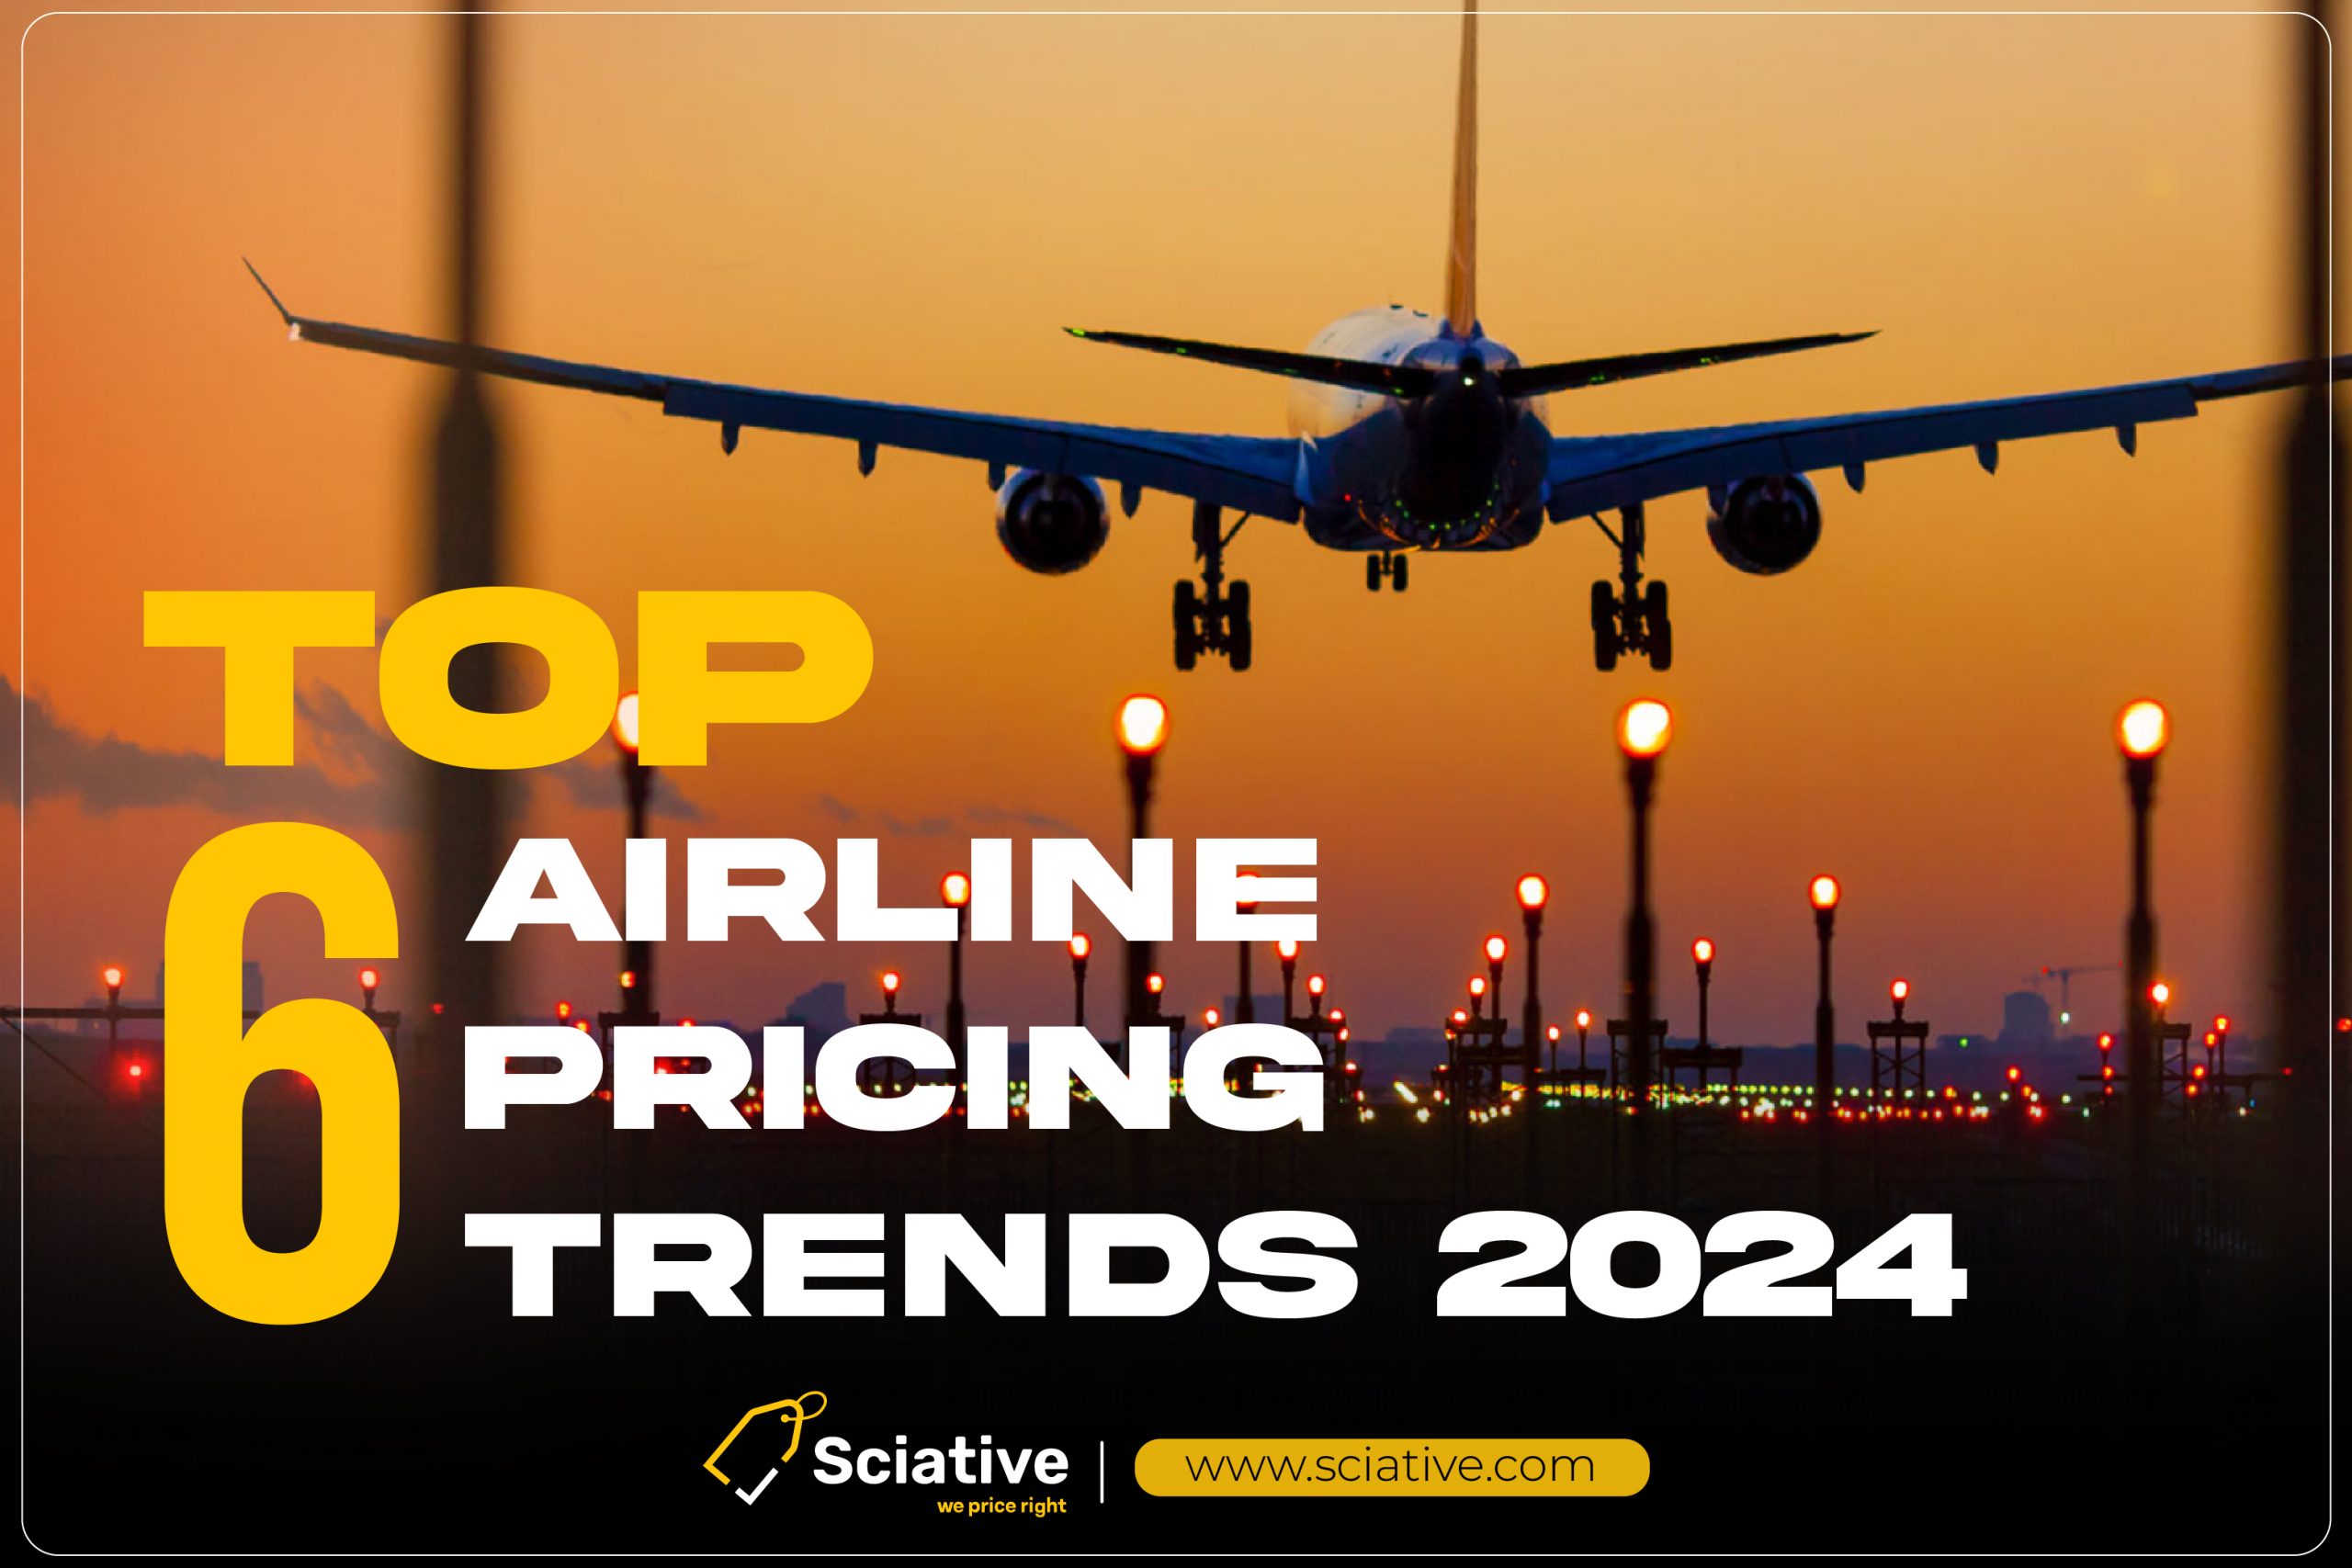 Top 6 Airline Pricing Trends 2024